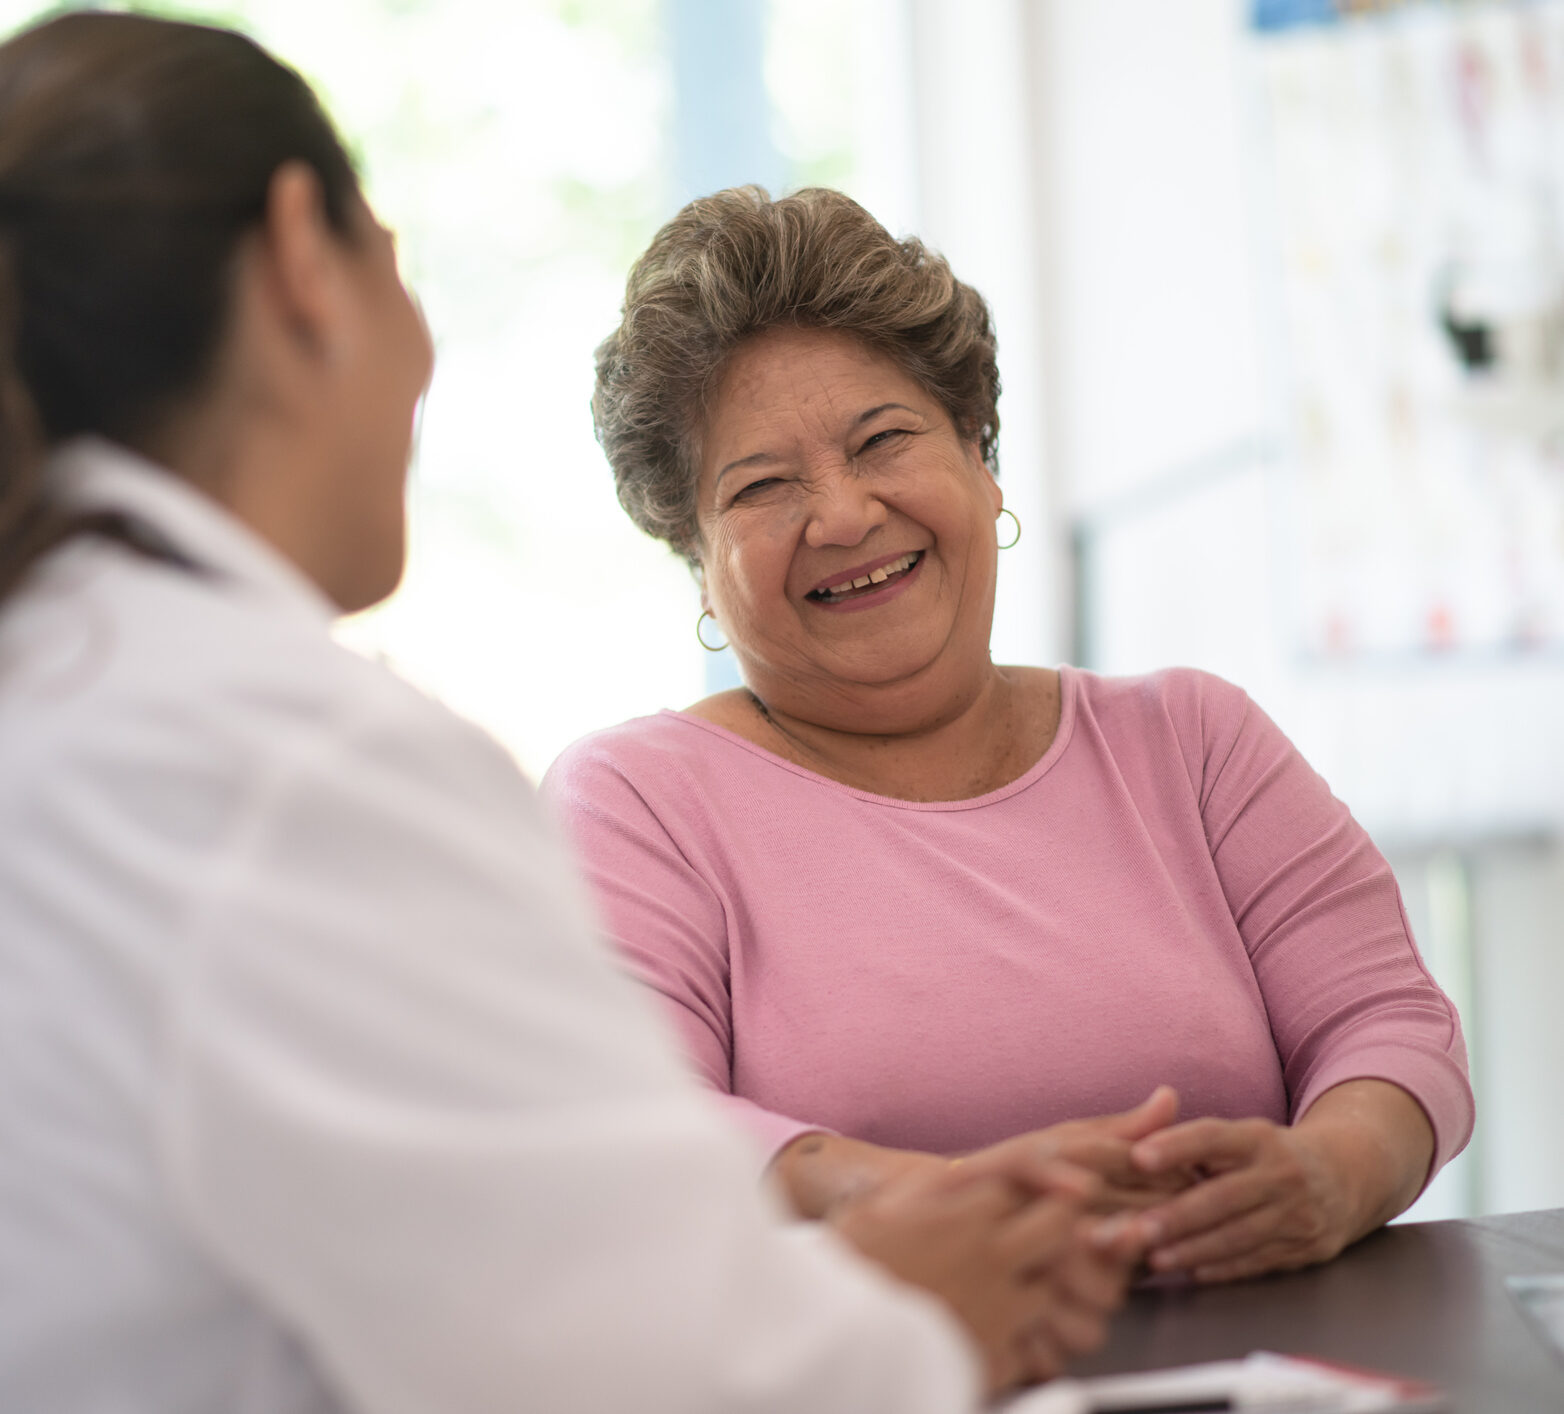 Older woman speaking and consulting with the doctor about her concerns